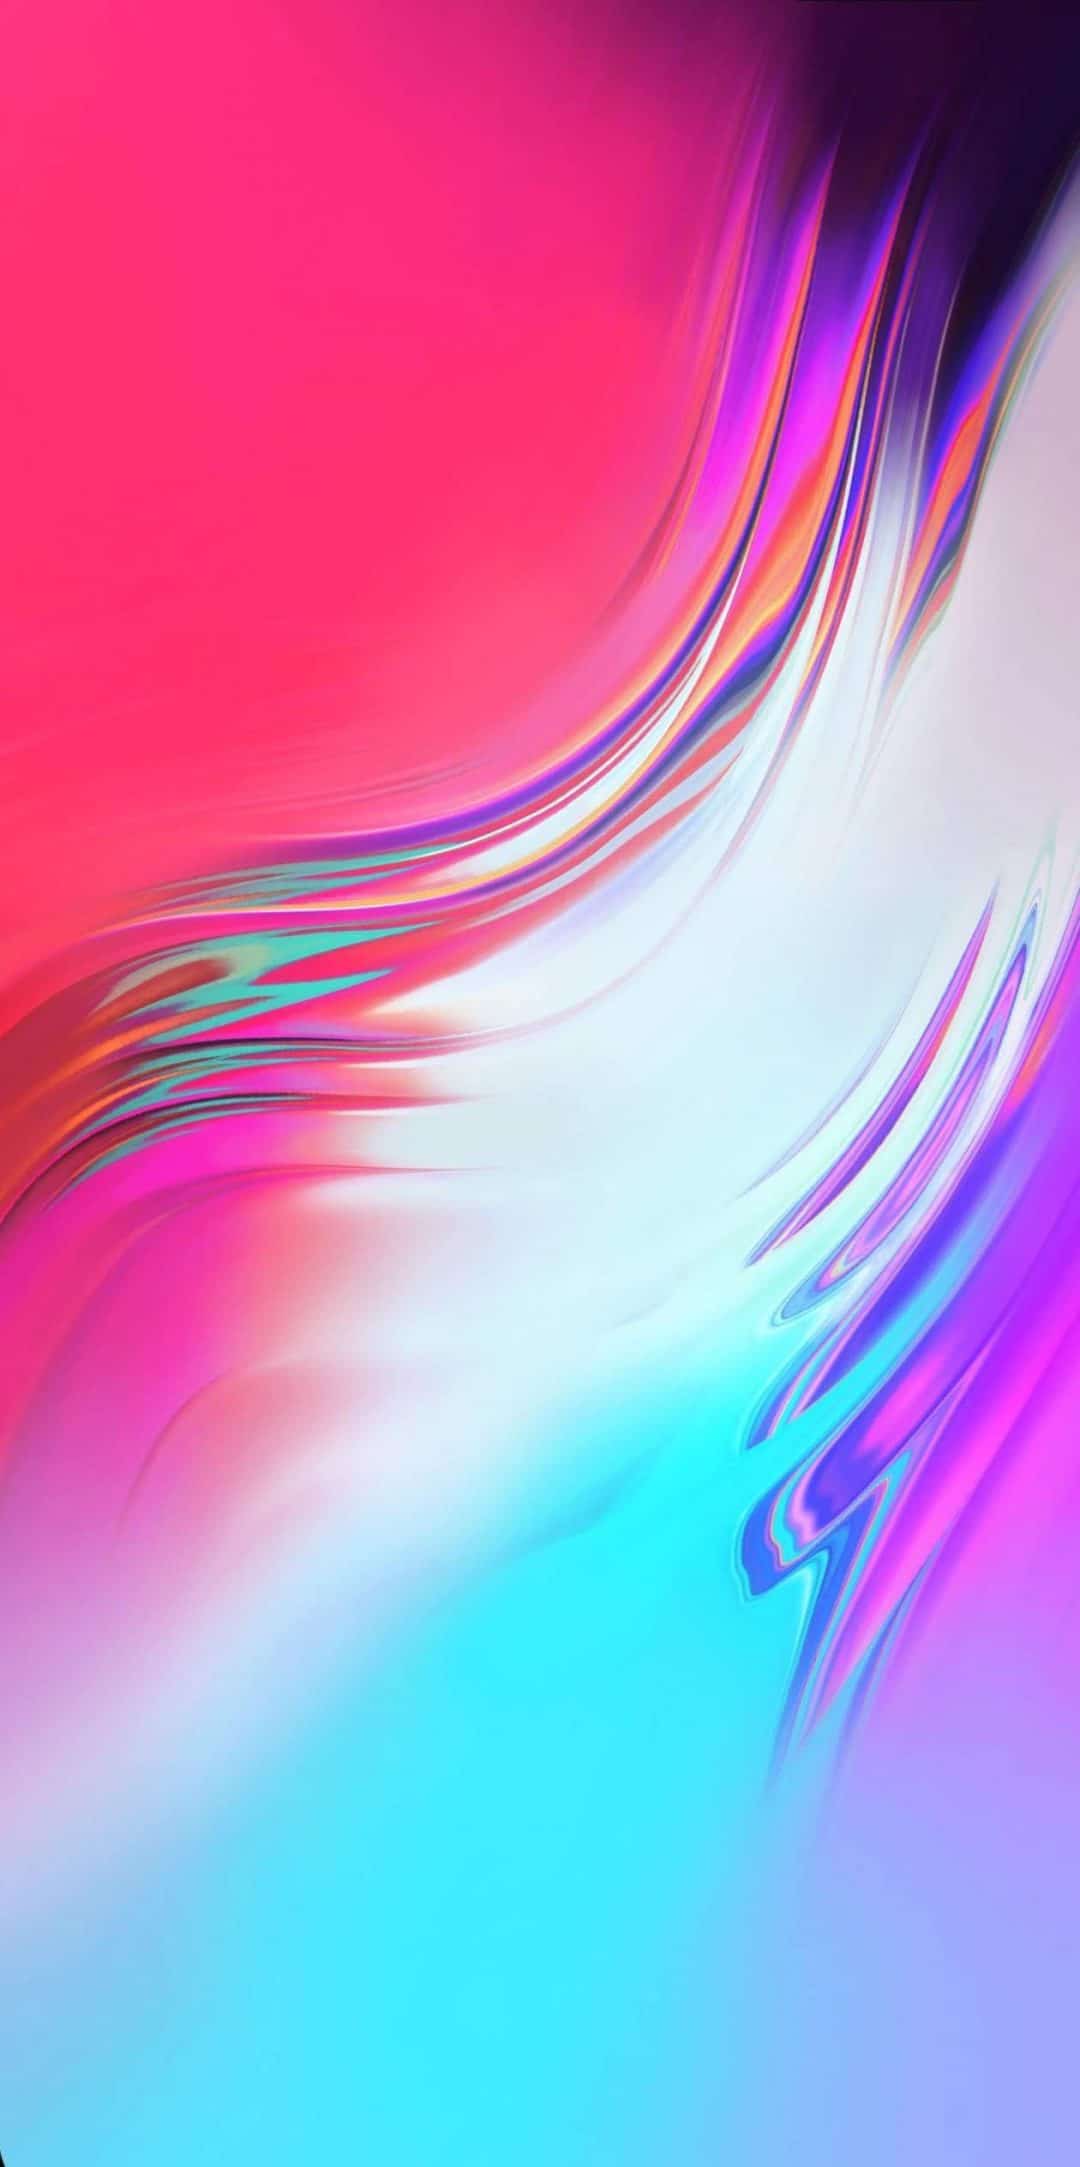 Samsung A10 Wallpapers